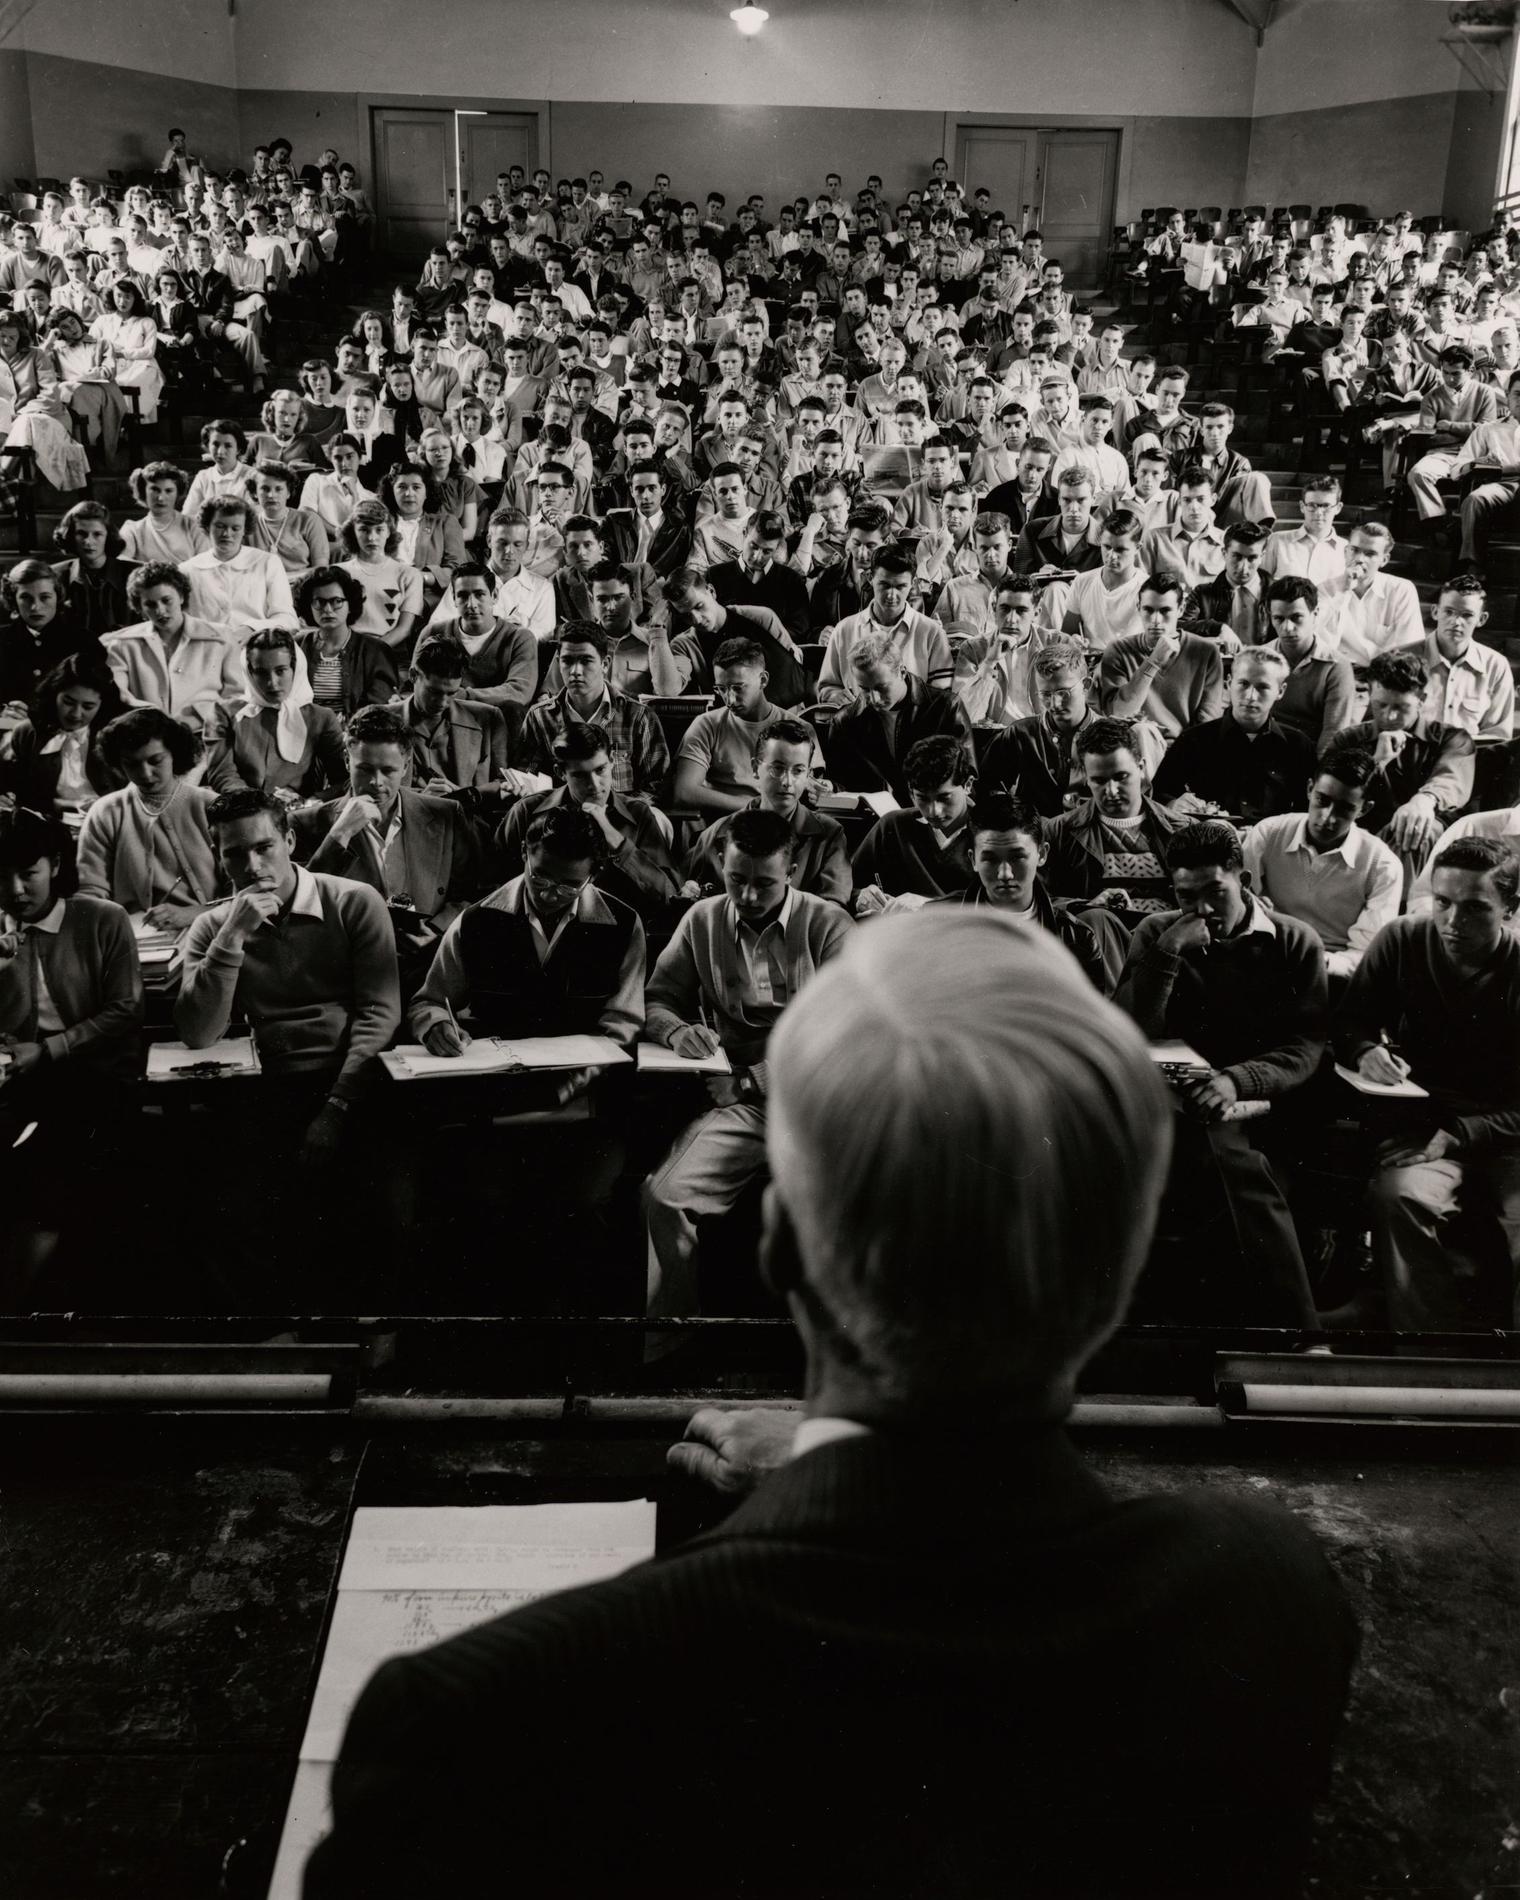 A man at a podium looks out into an auditorium containing hundreds of people